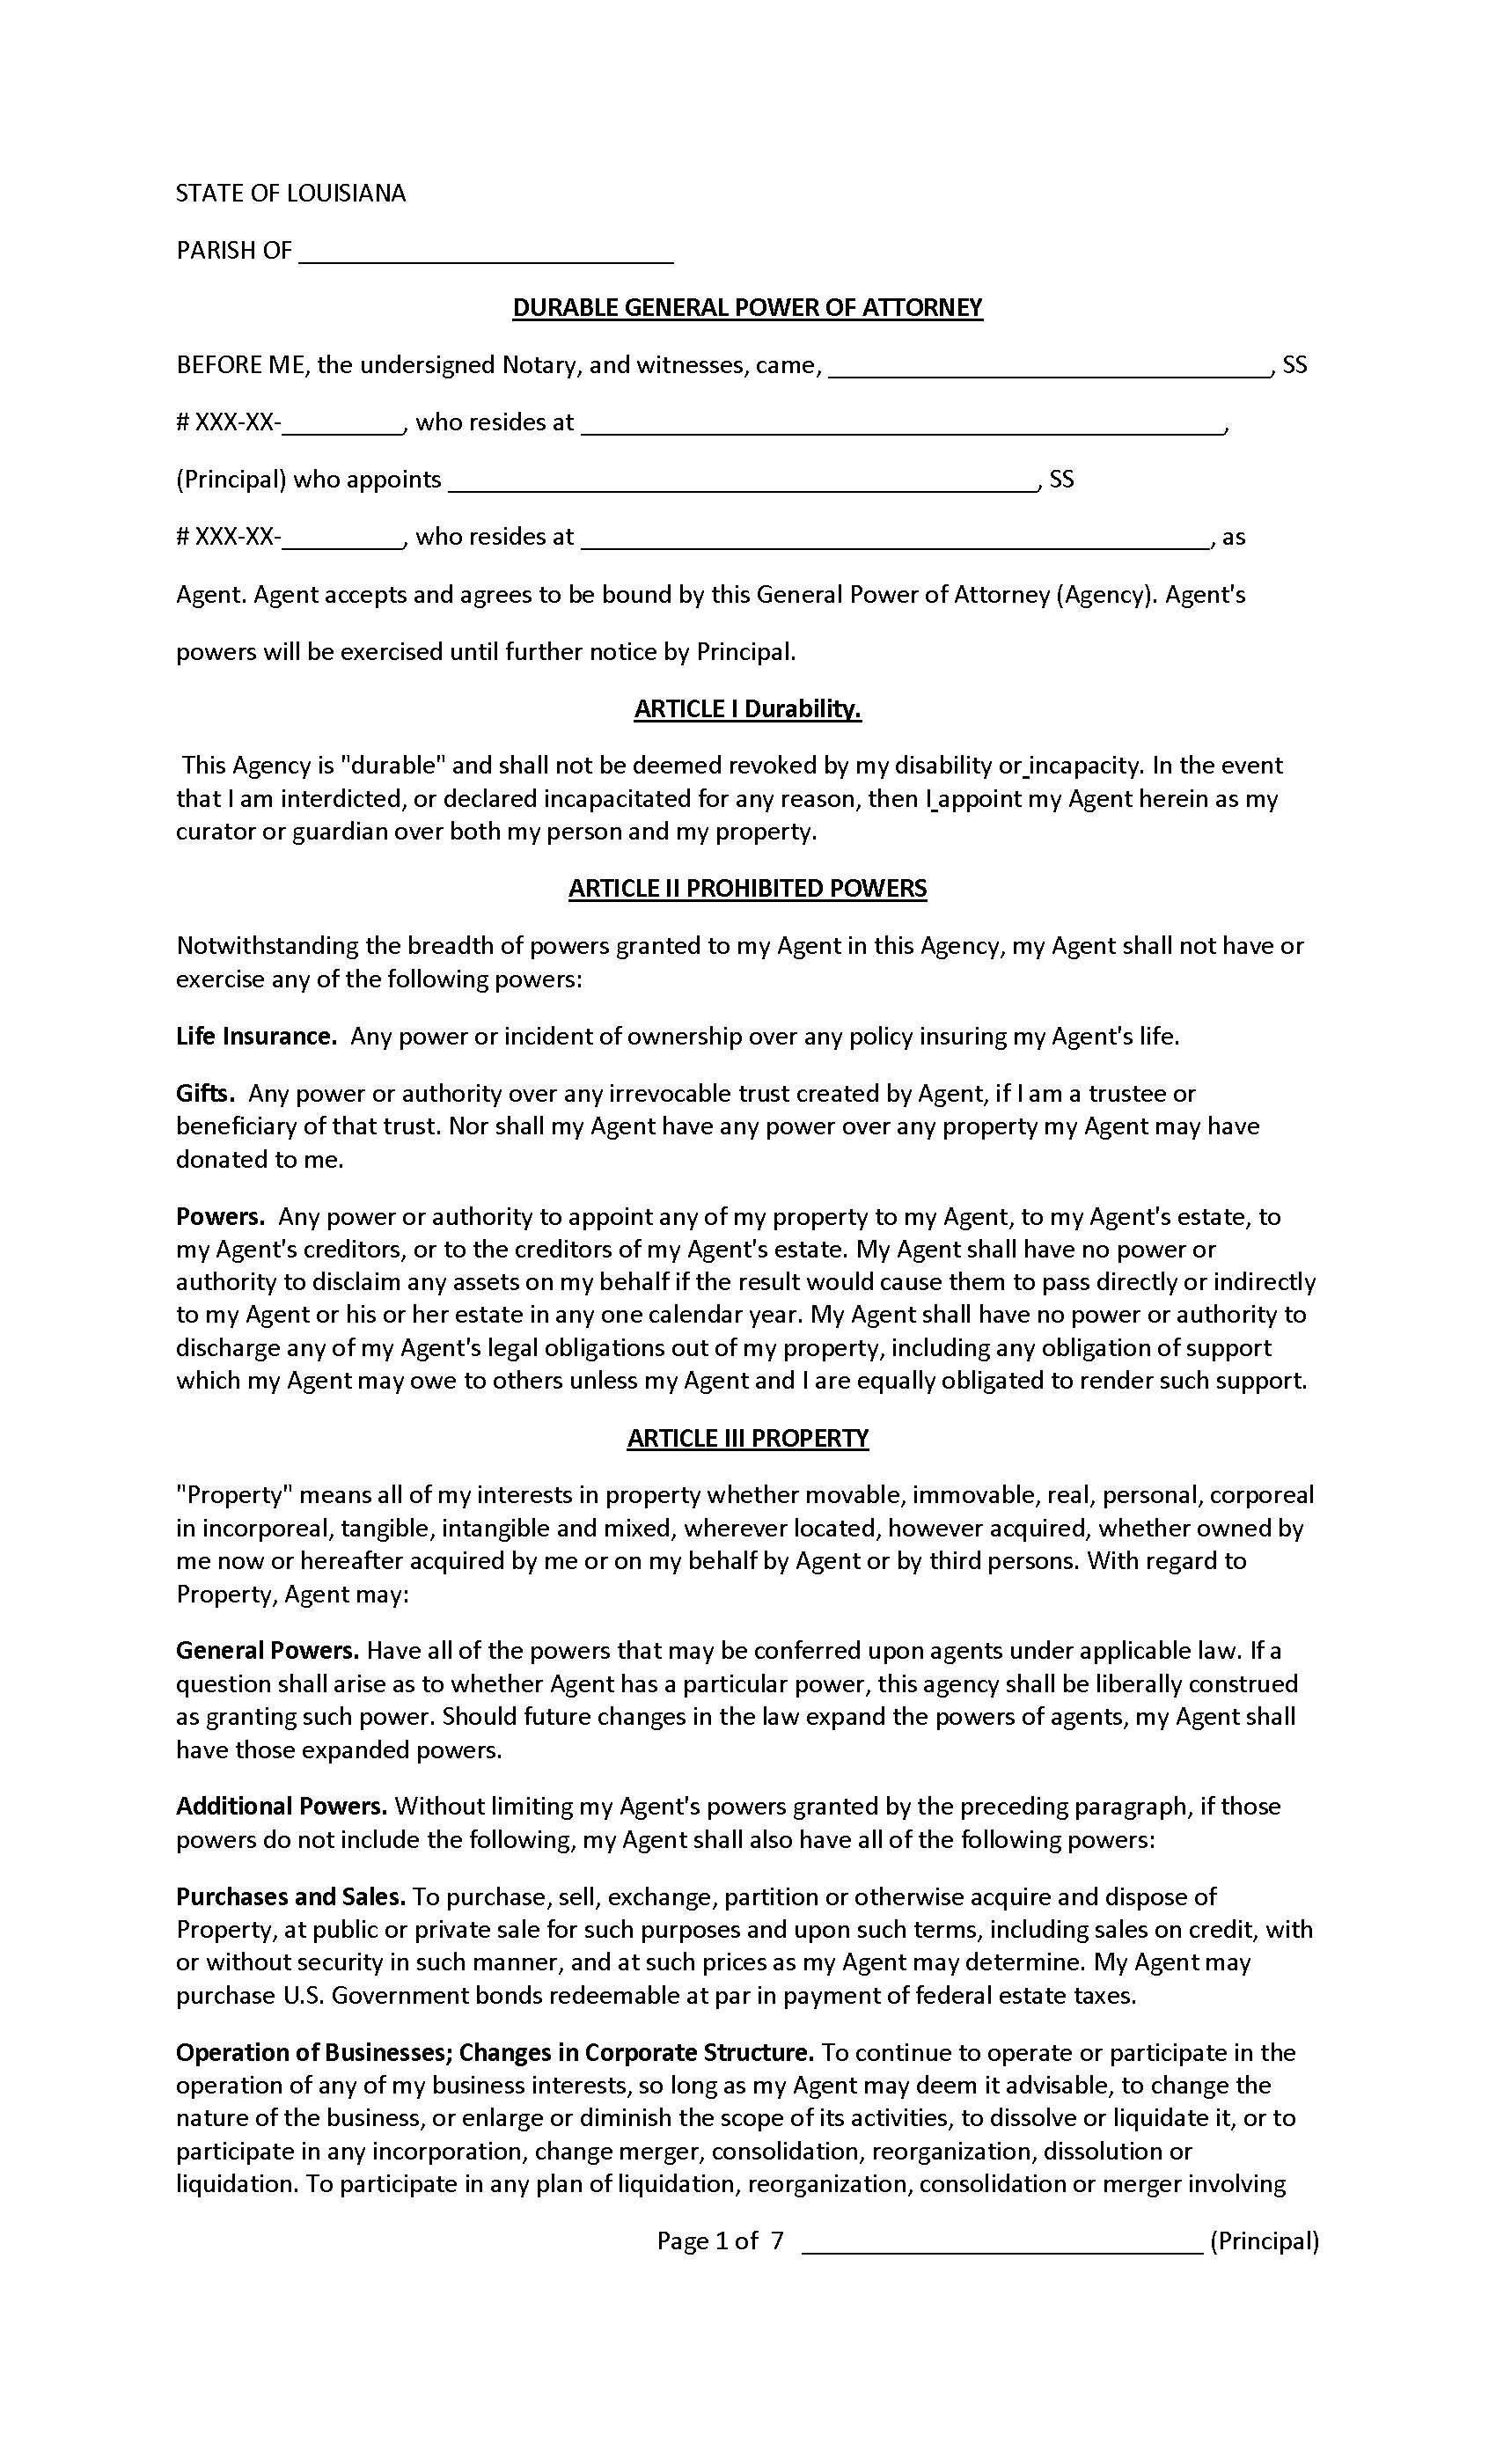 louisiana-financial-power-of-attorney-form-free-printable-legal-forms